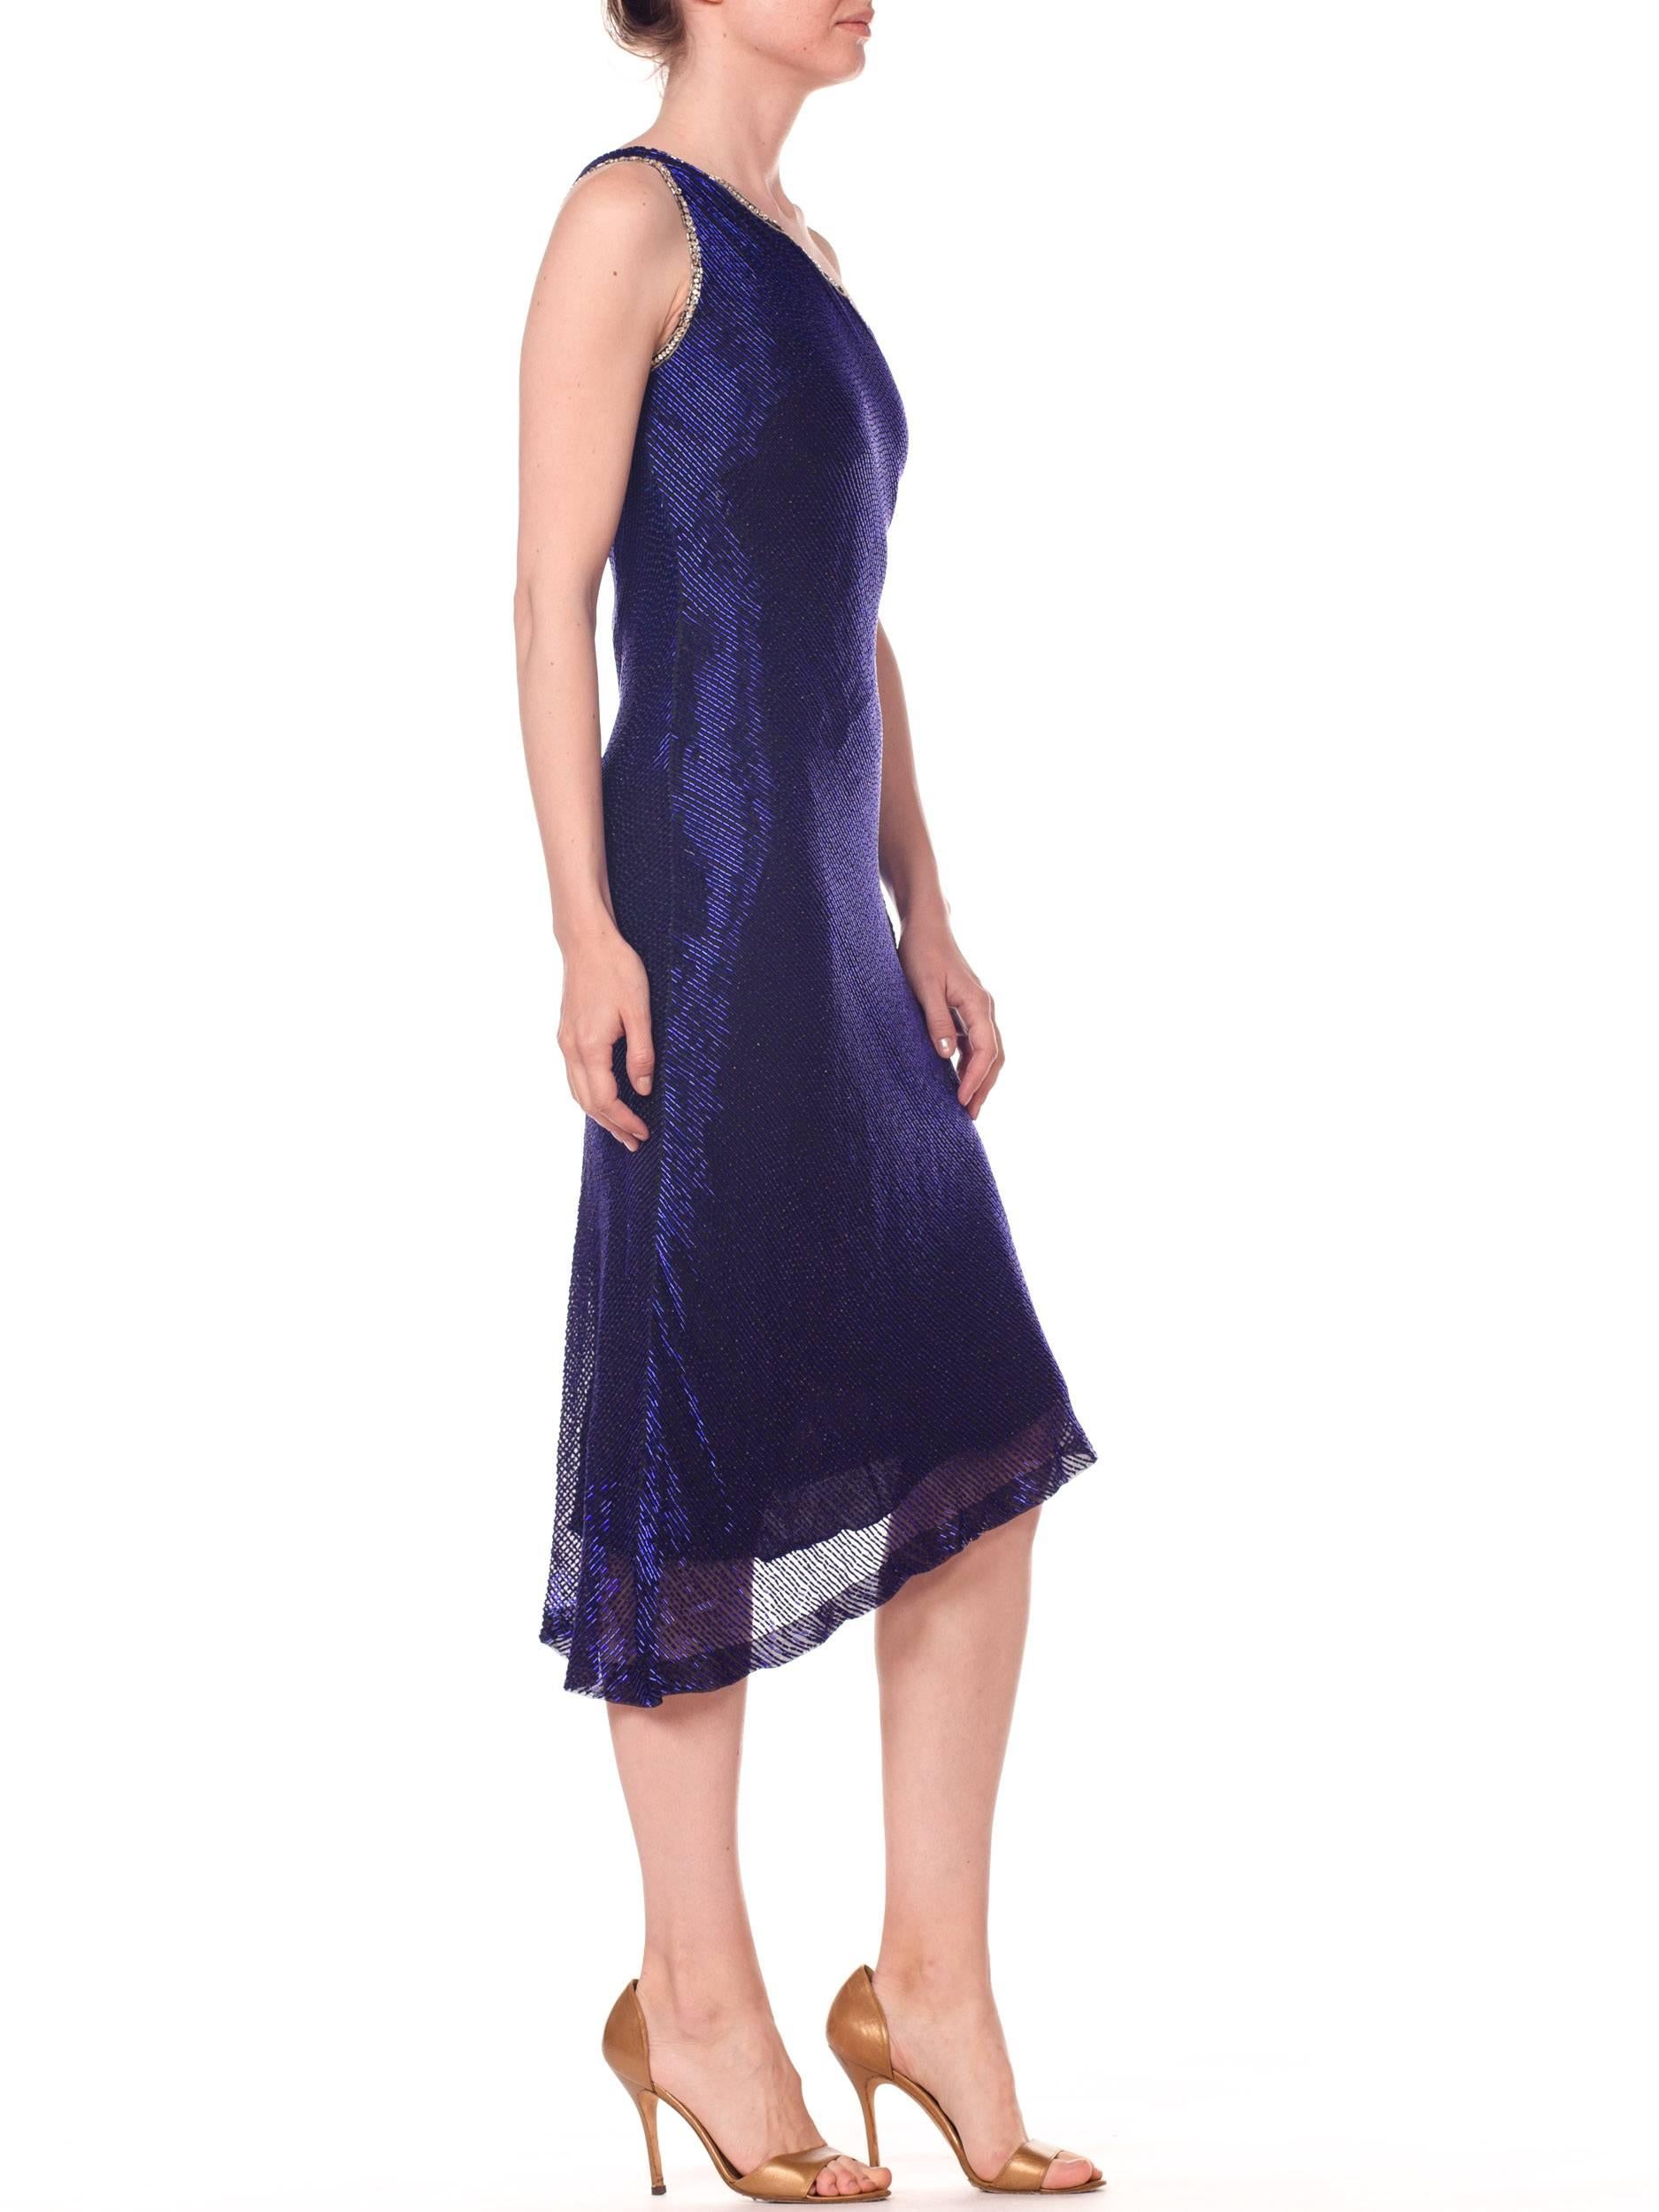 1970S Black Bias Cut Silk Chiffon One Shoulder Cobalt Blue Beaded Cocktail Dress In Excellent Condition For Sale In New York, NY